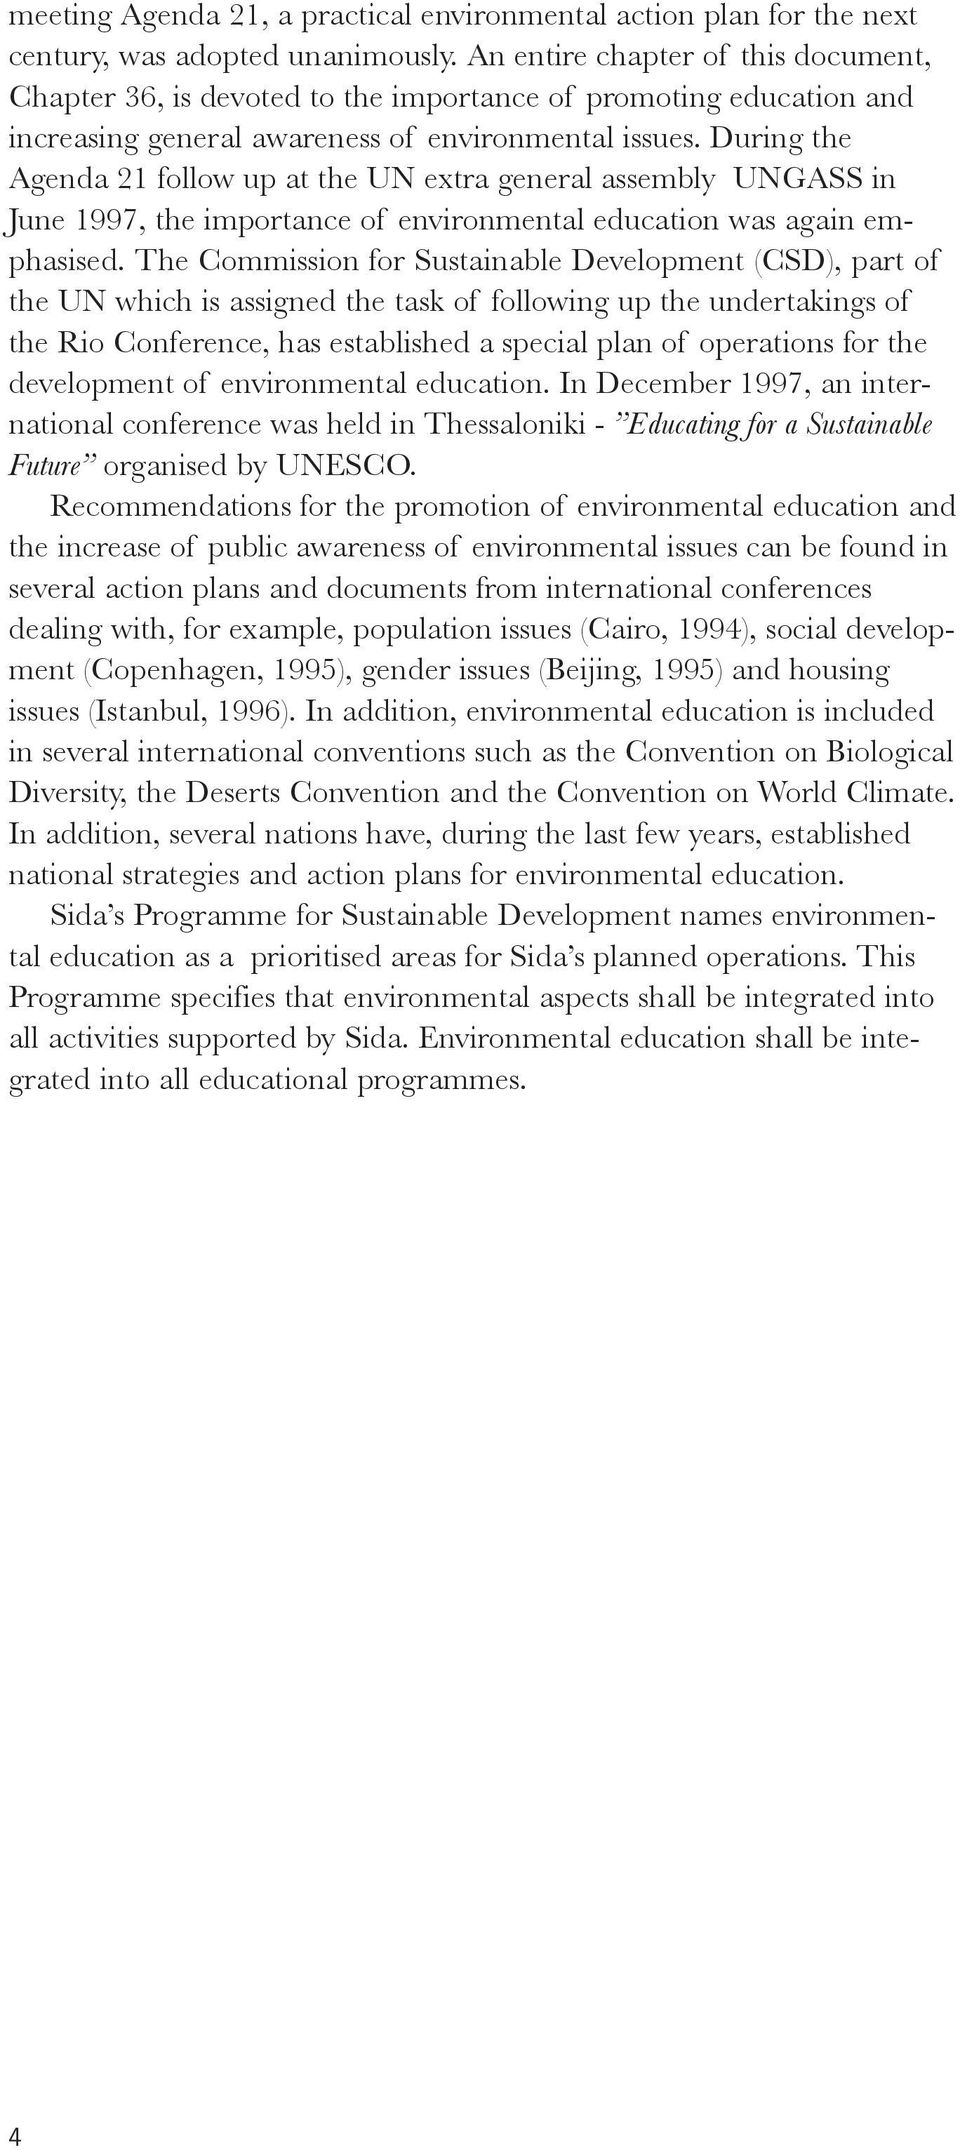 During the Agenda 21 follow up at the UN extra general assembly UNGASS in June 1997, the importance of environmental education was again emphasised.